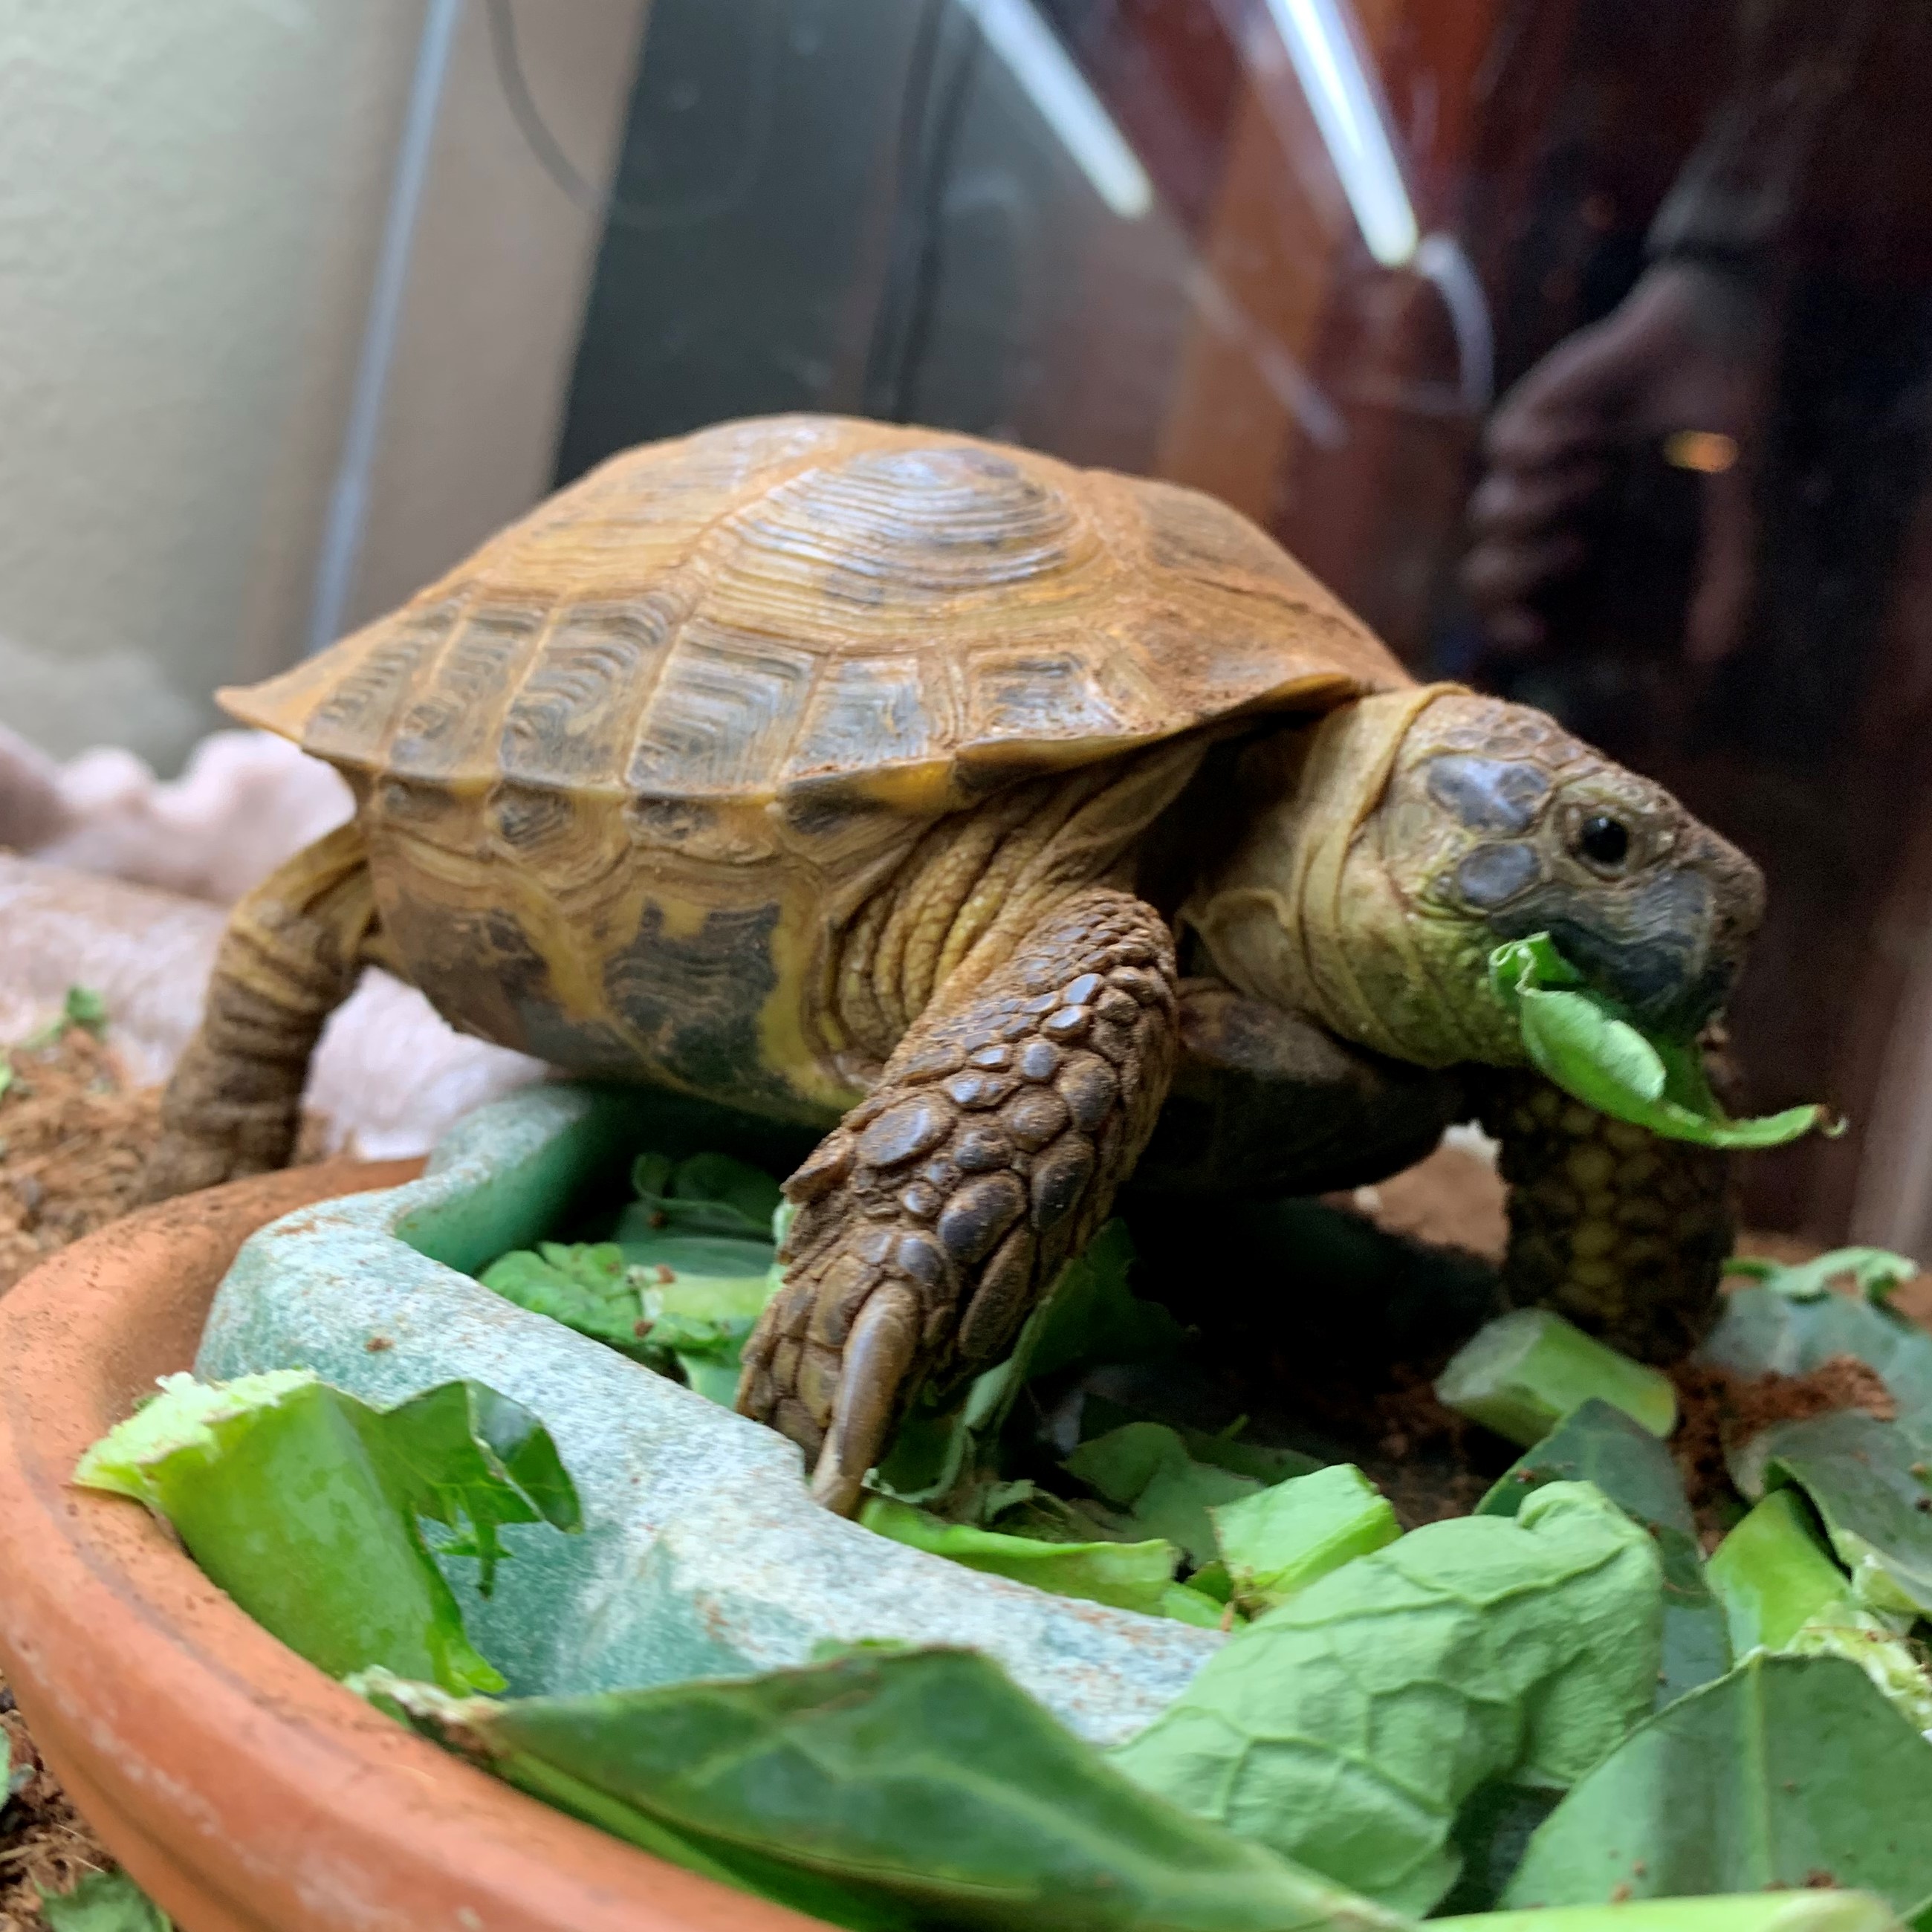 Photograph of the tortoise, Colonel Mustard